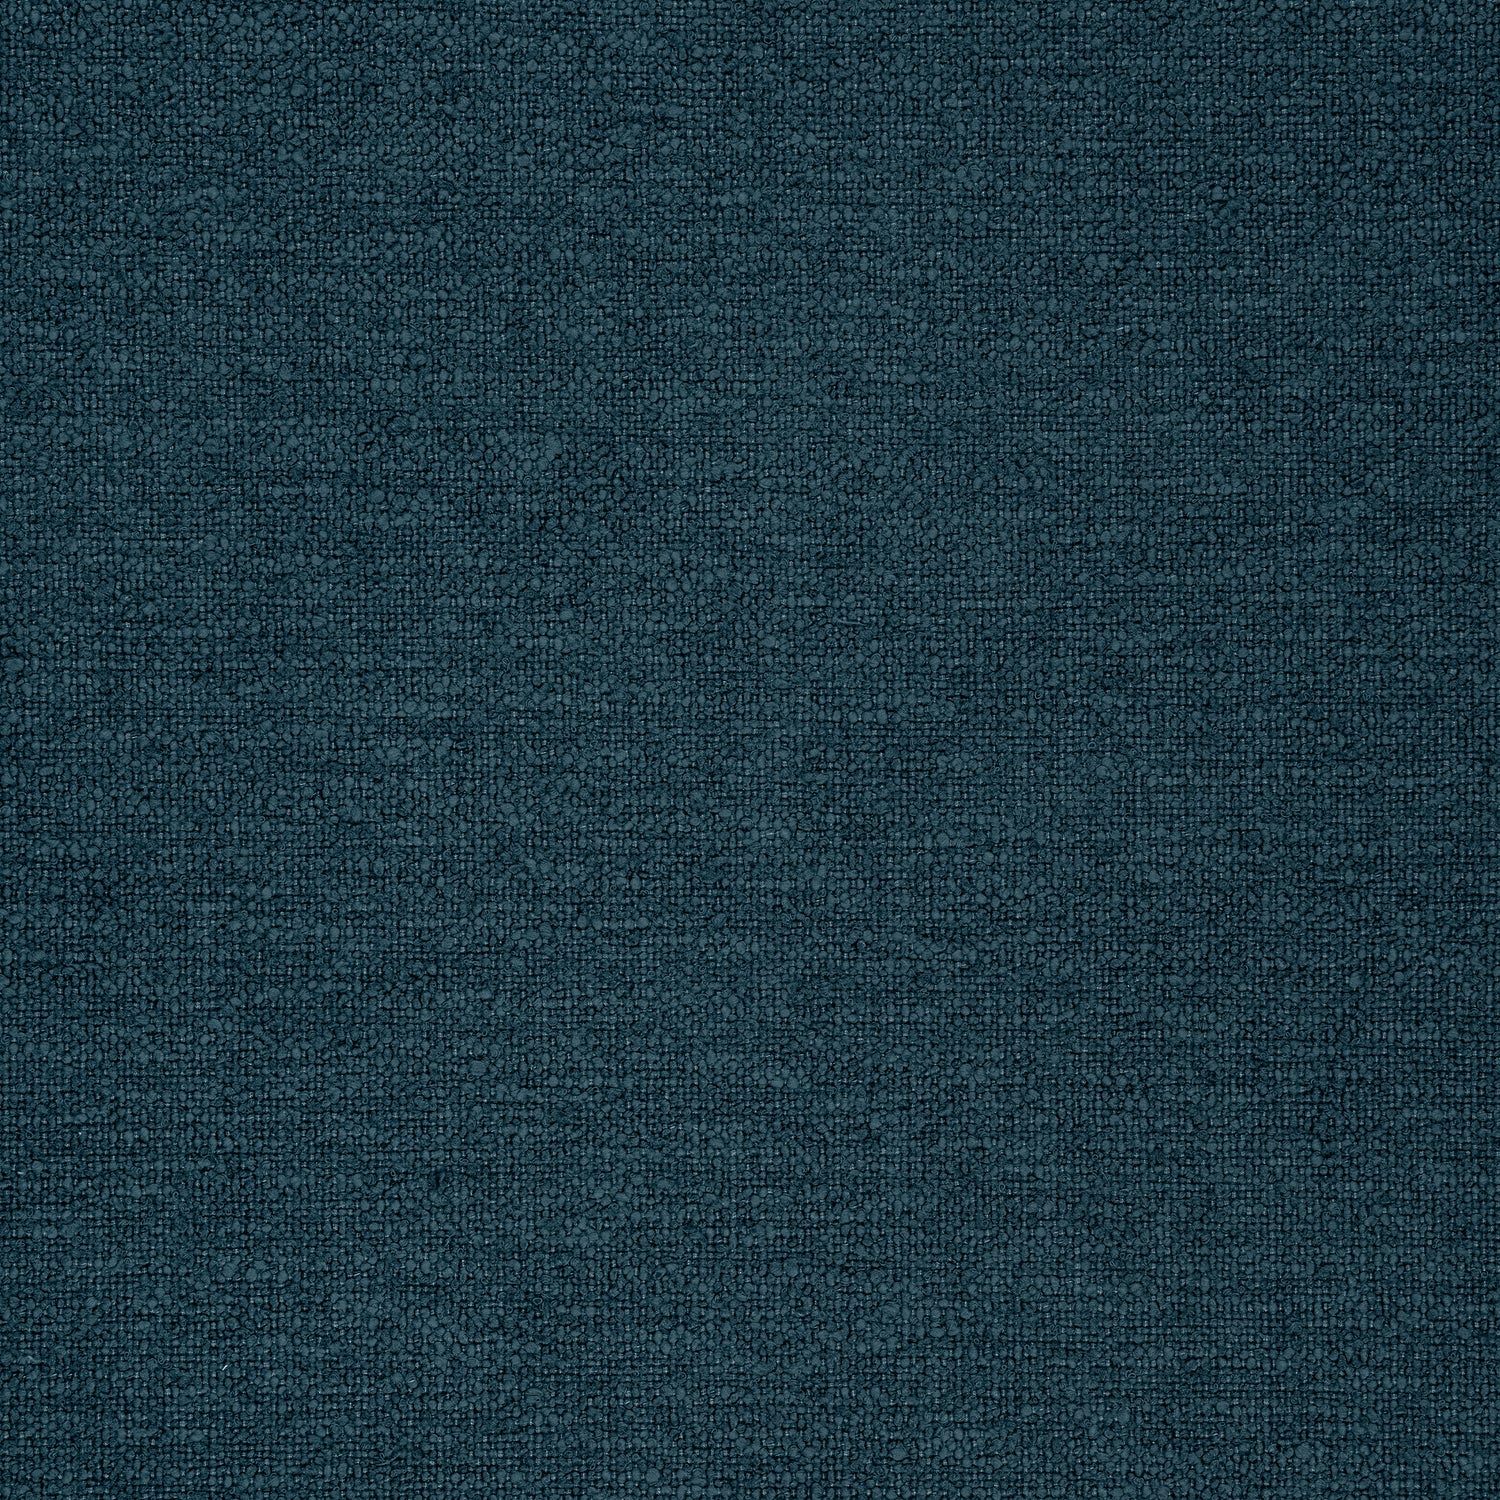 Sasso fabric in navy color - pattern number W77113 - by Thibaut in the Veneto collection